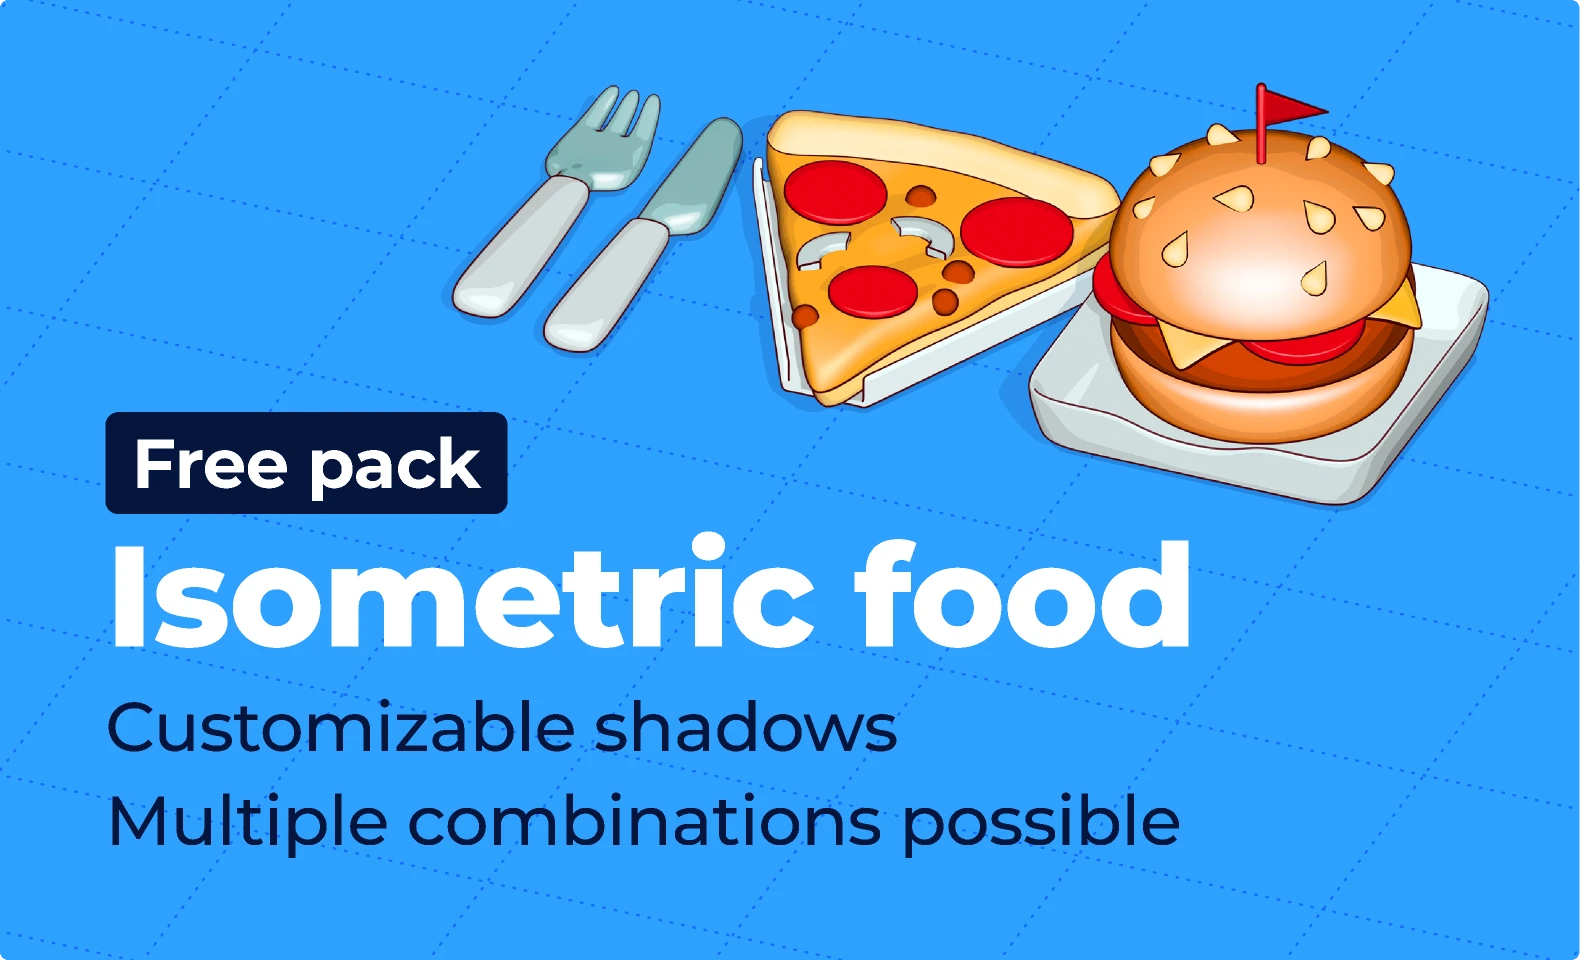 Isometric food - Free pack for Figma and Adobe XD